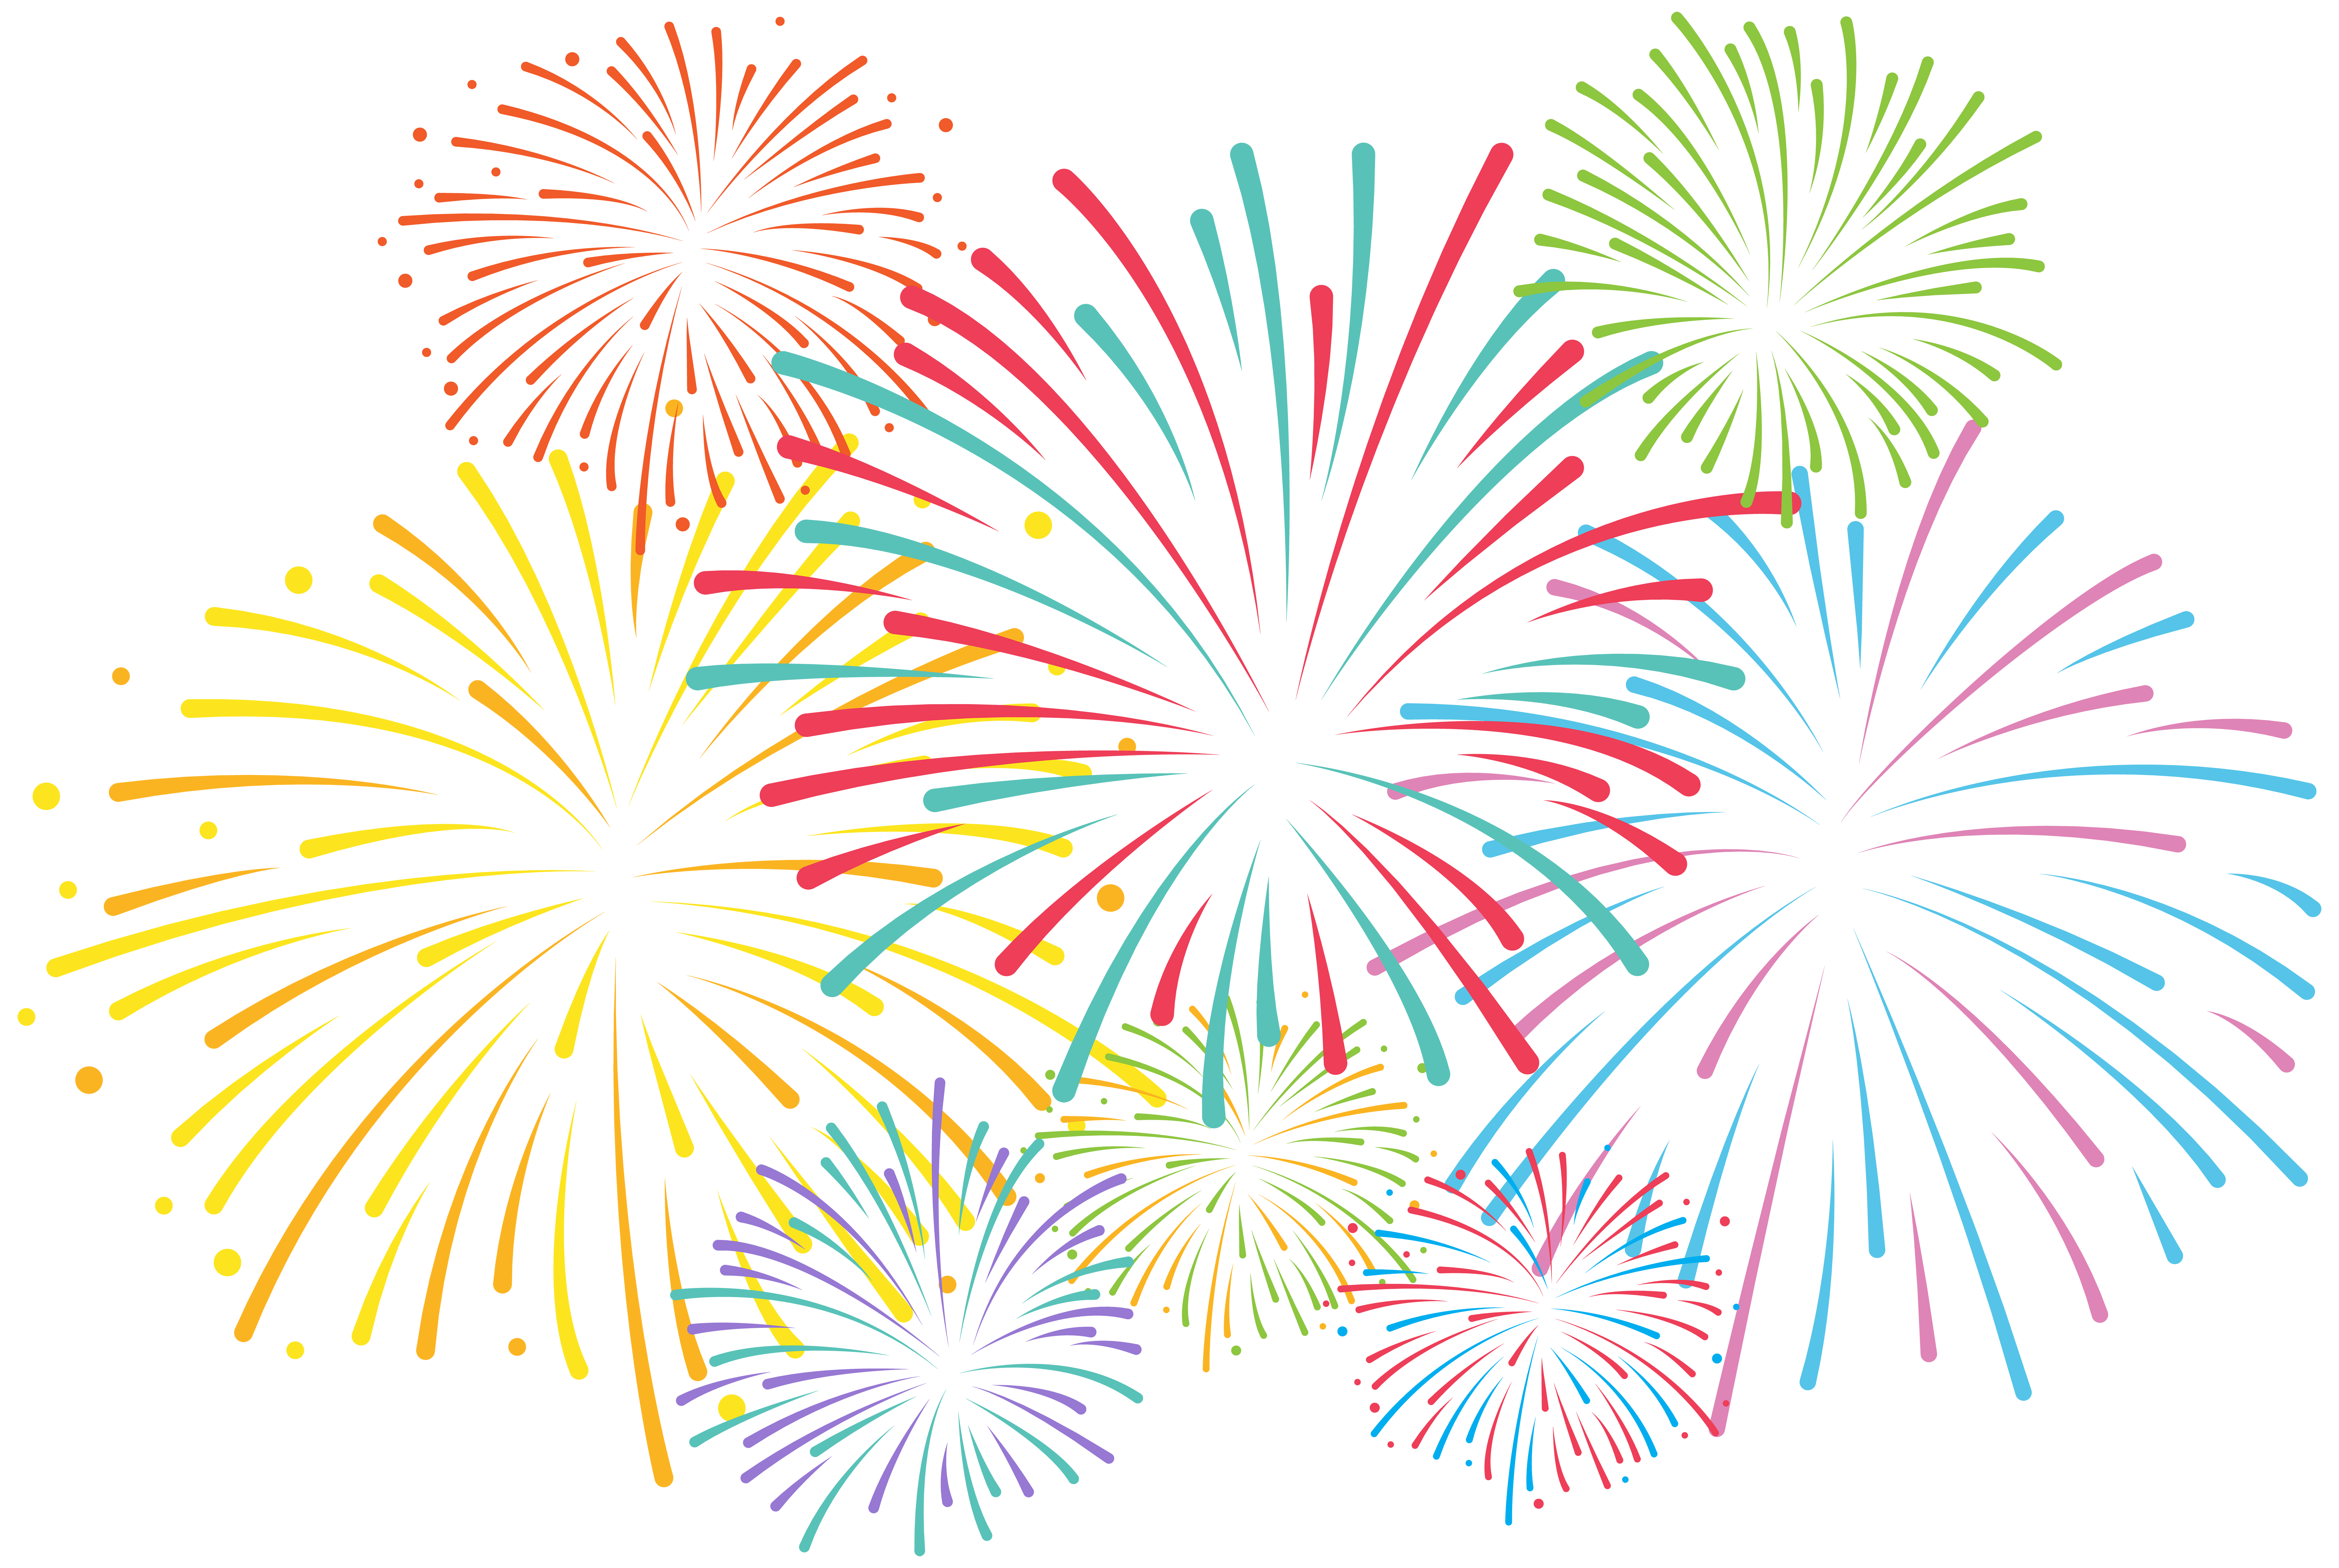 Fireworks clip art fireworks animations clipart 2 image 3